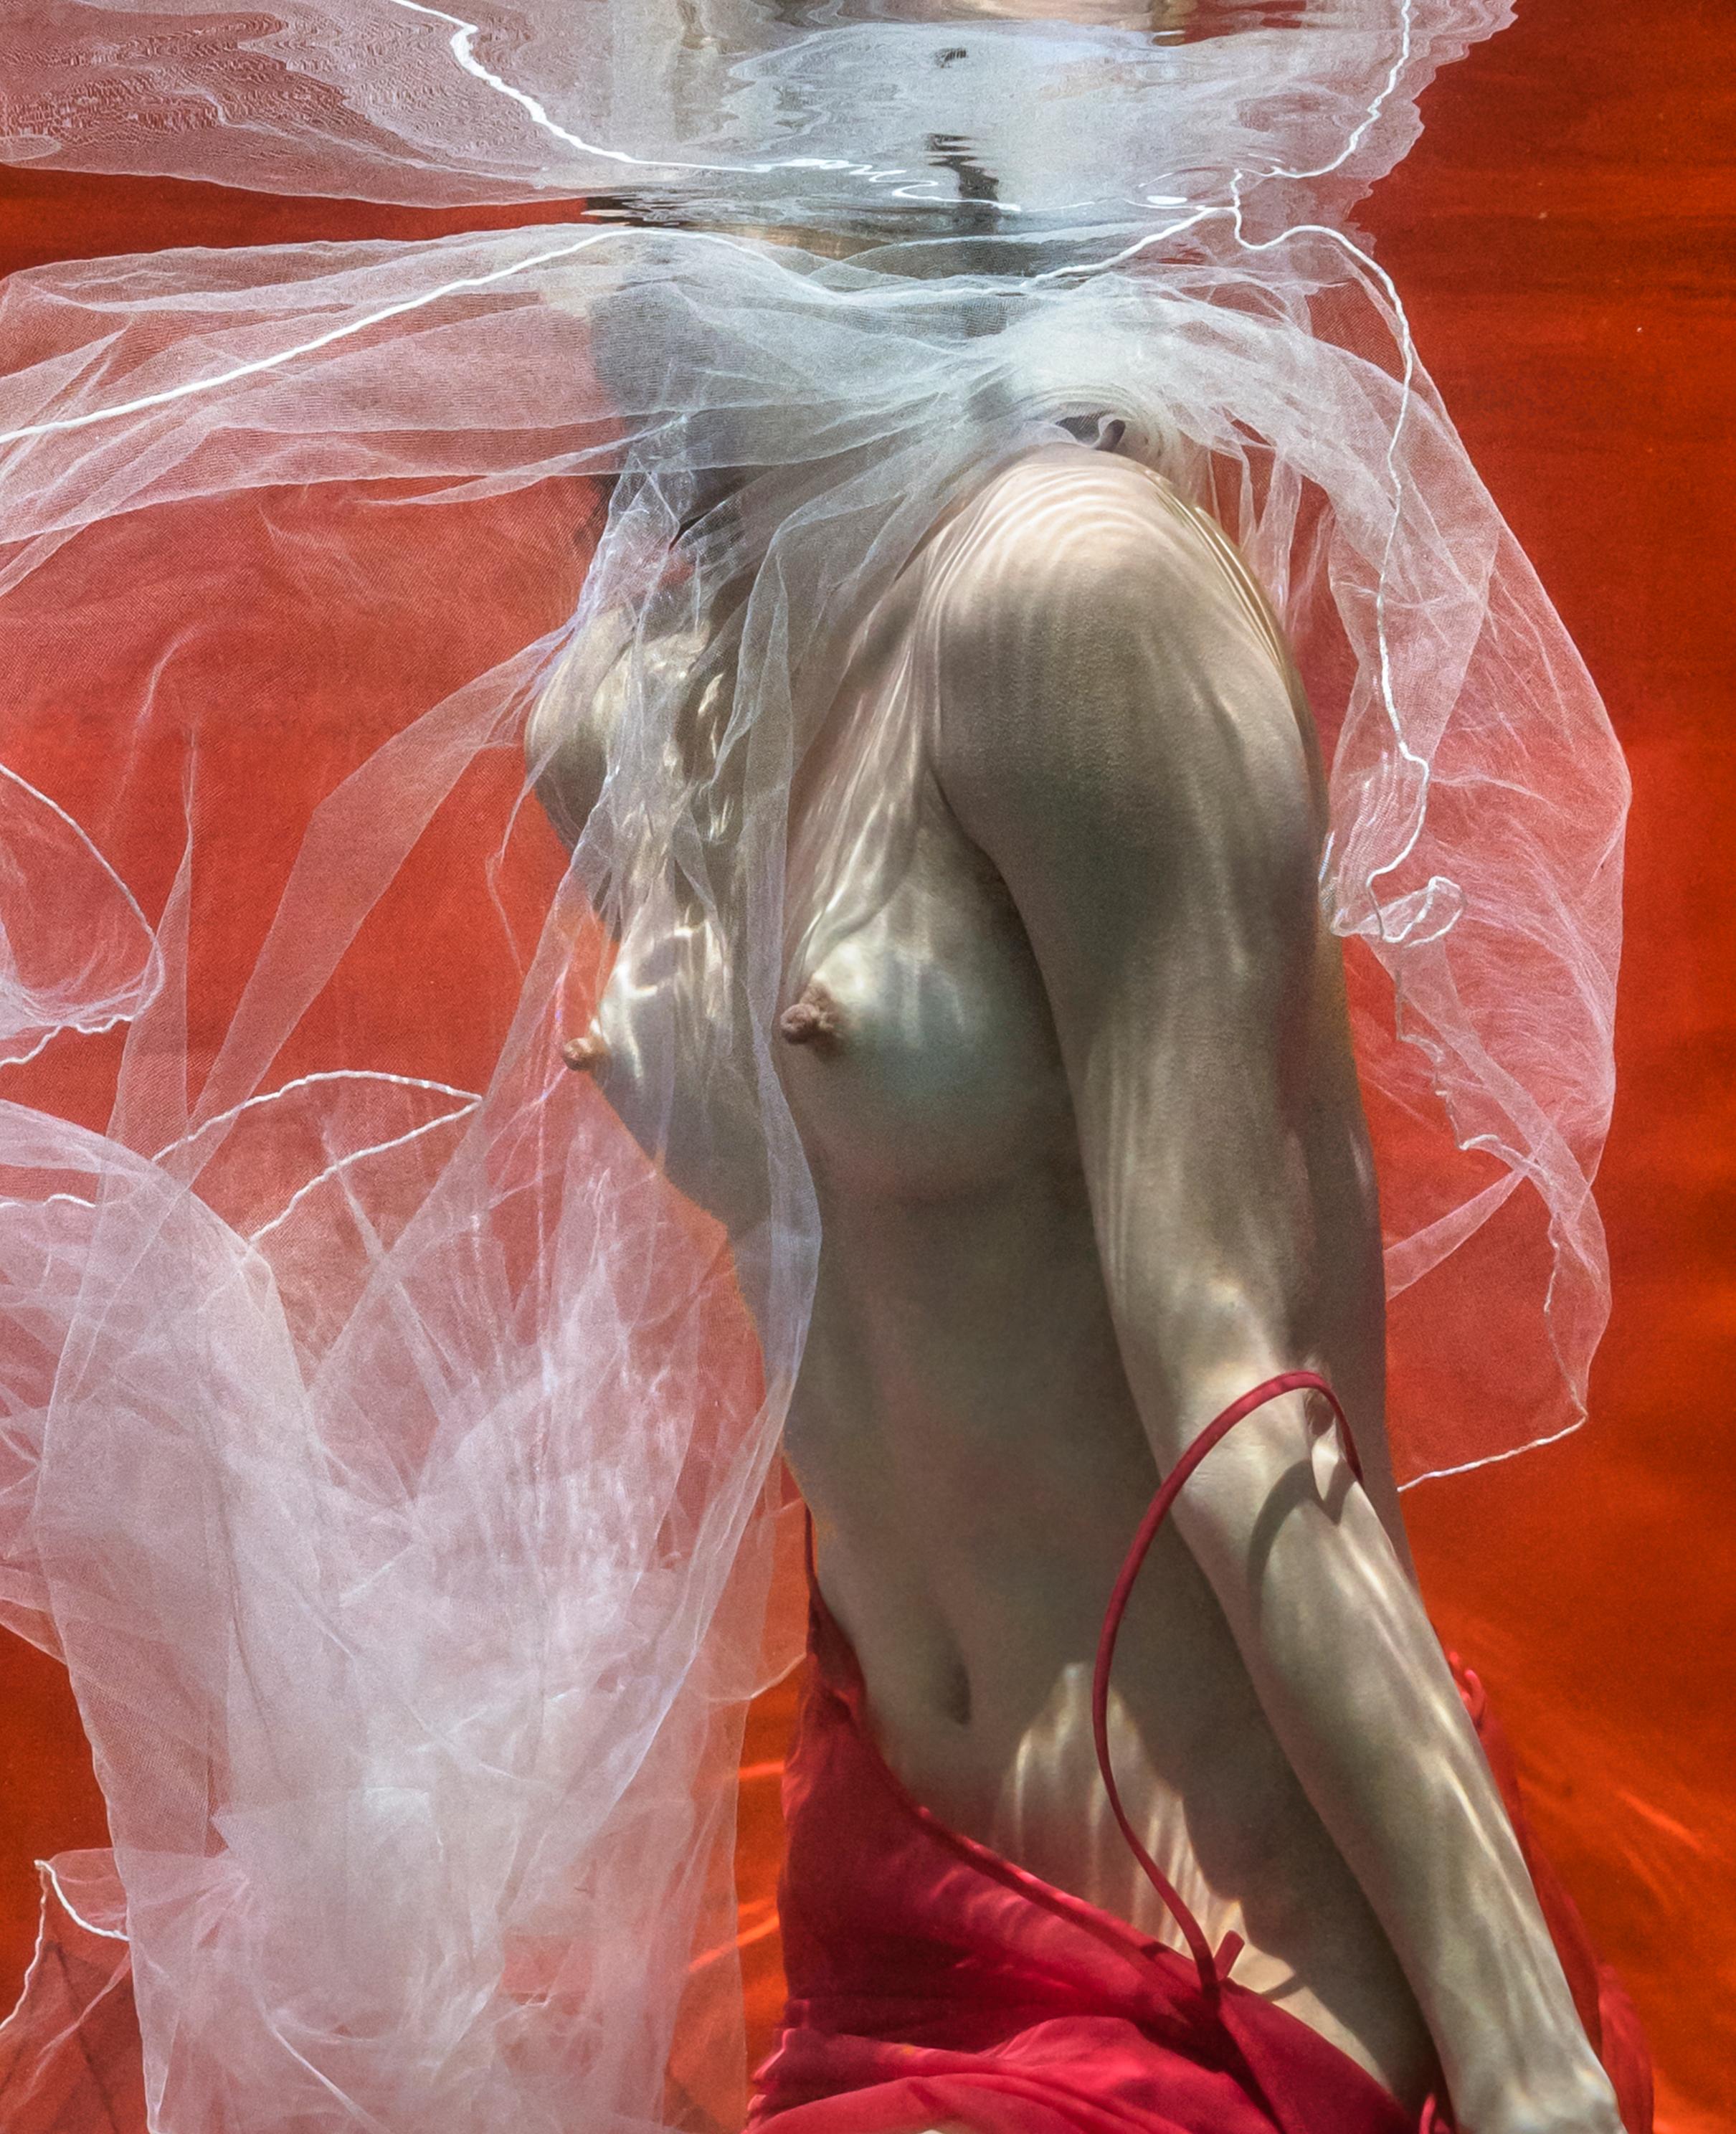 Blood and Milk III - underwater nude photograph - print on paper 35 x 25